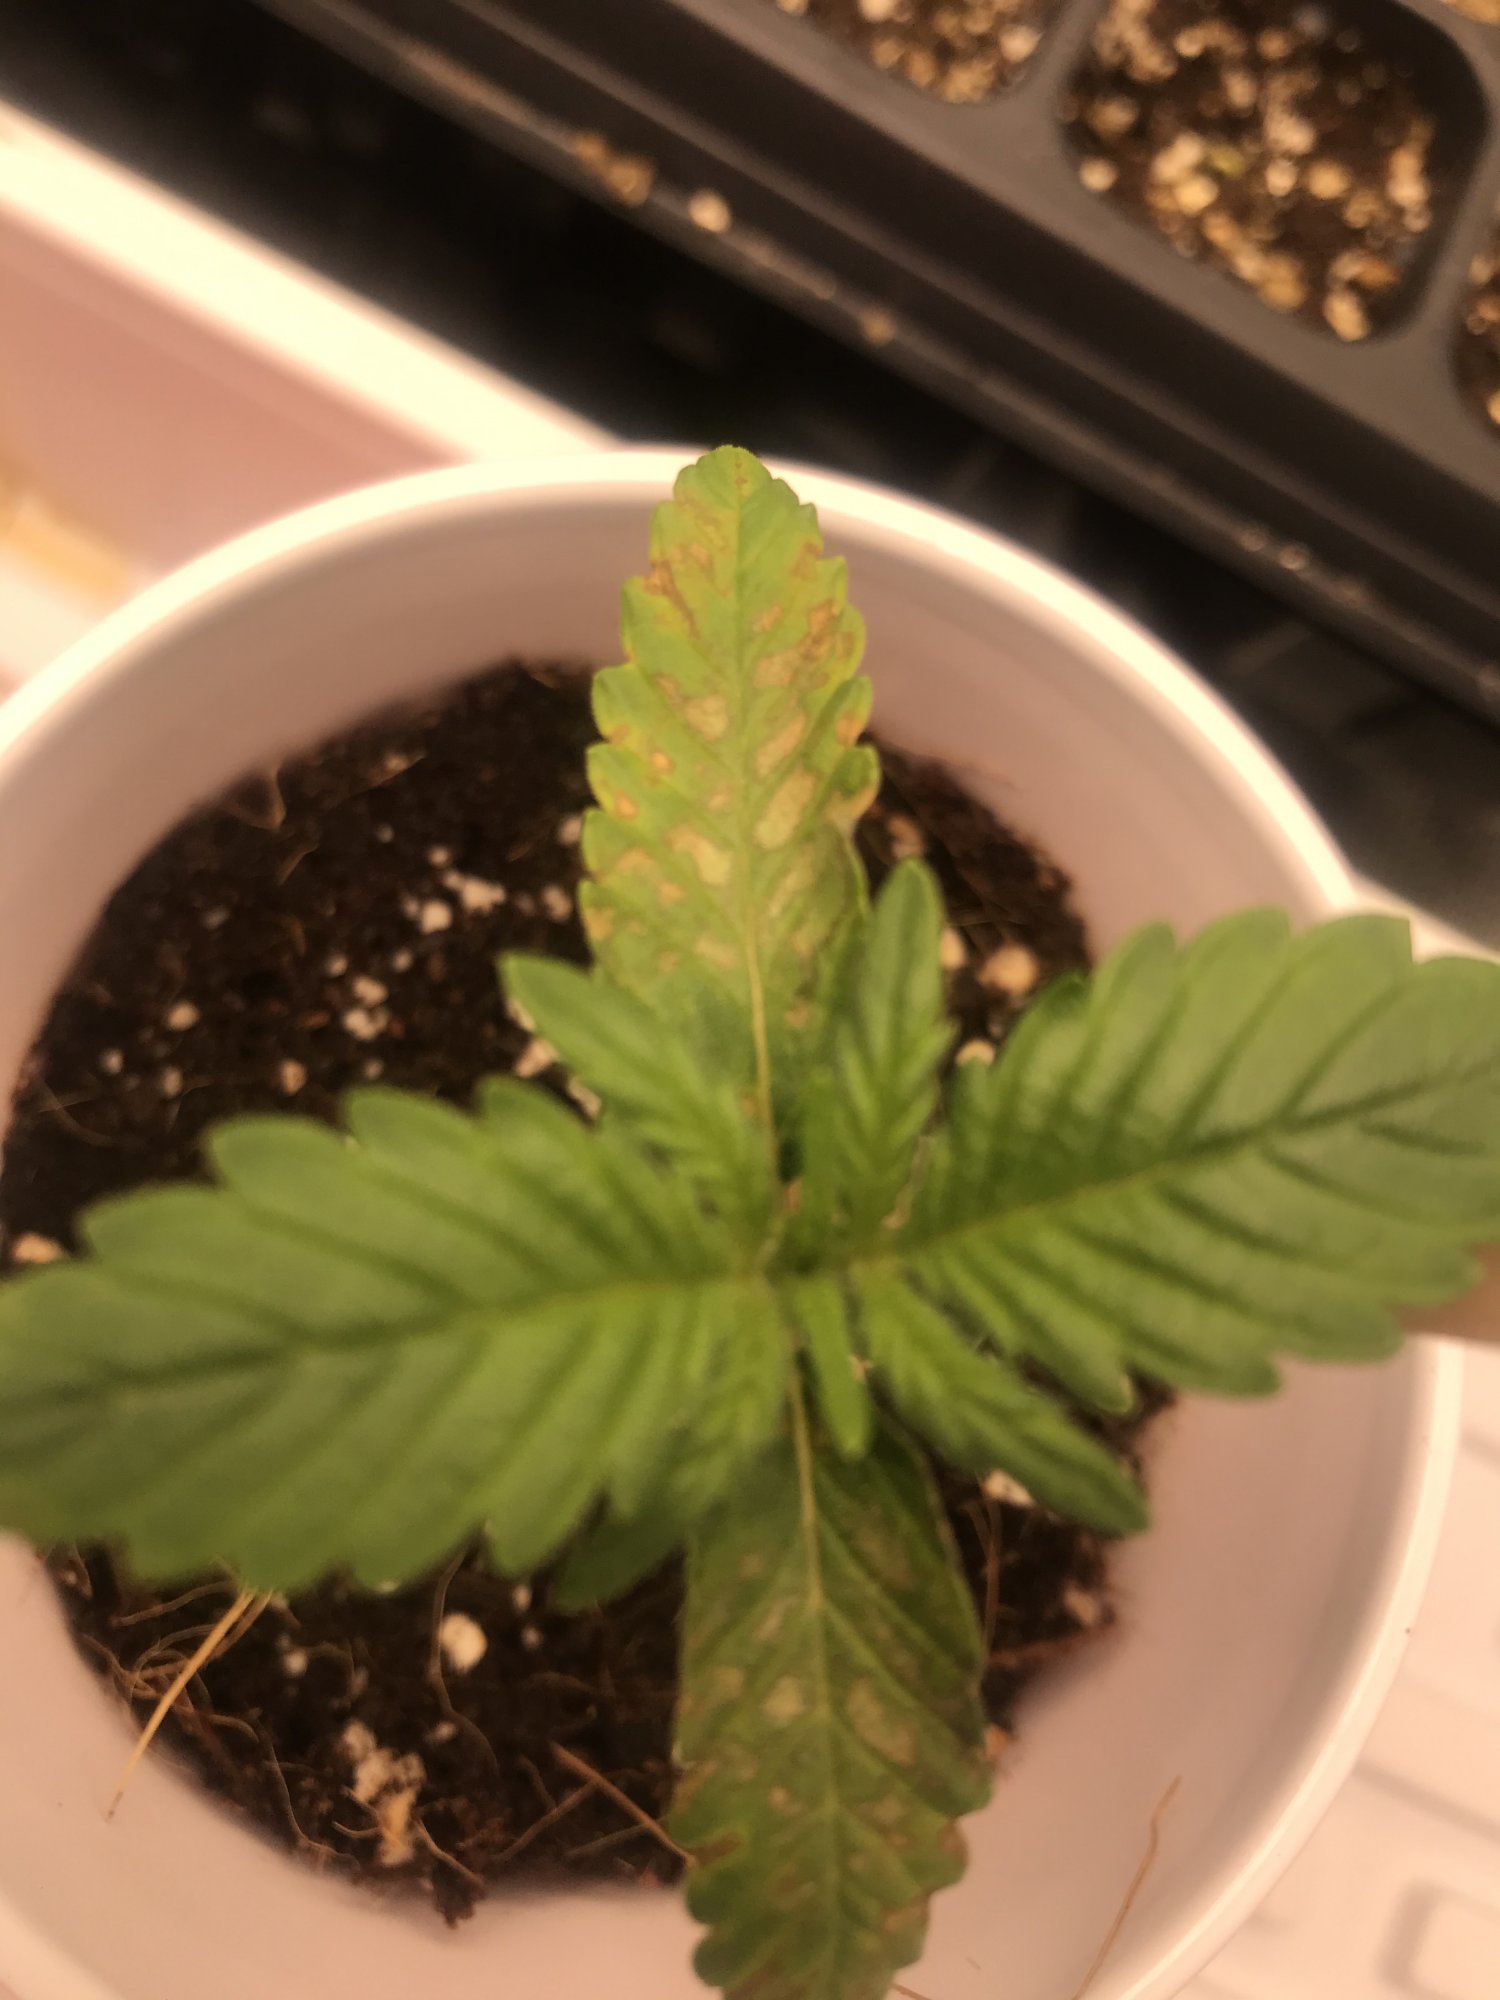 Having some issues with 1 plant of 4